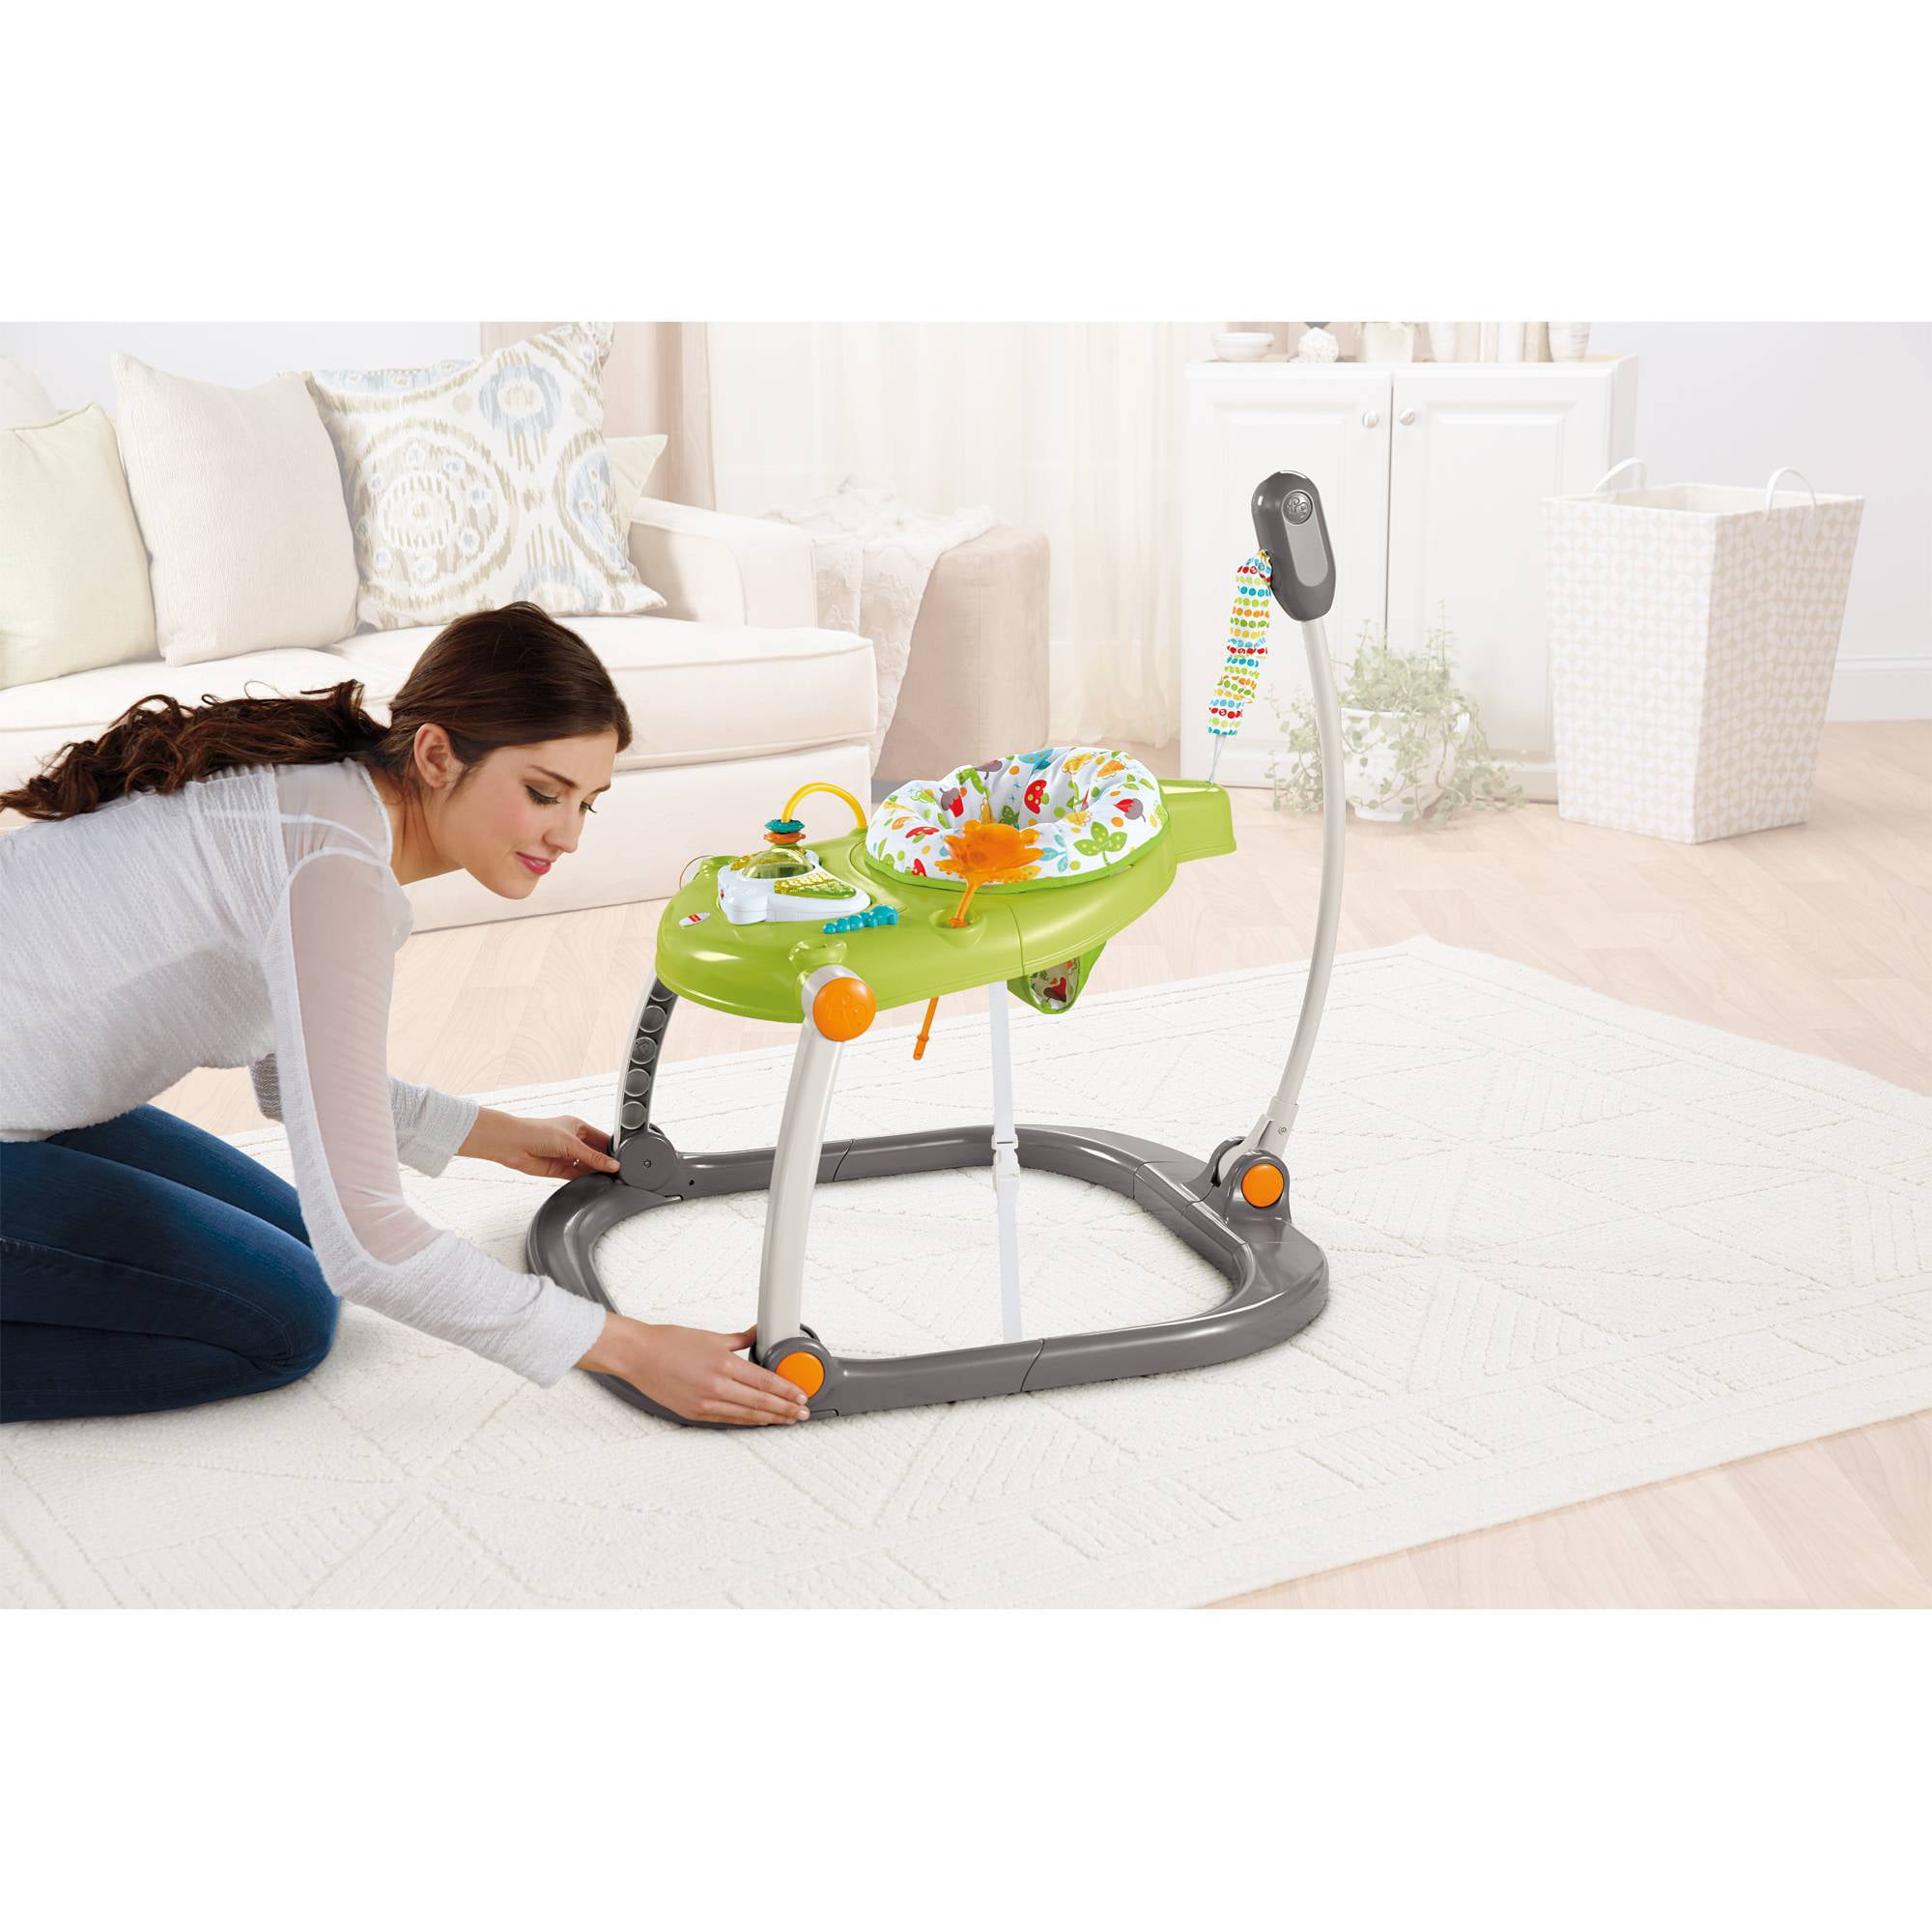 fisher price compact jumperoo